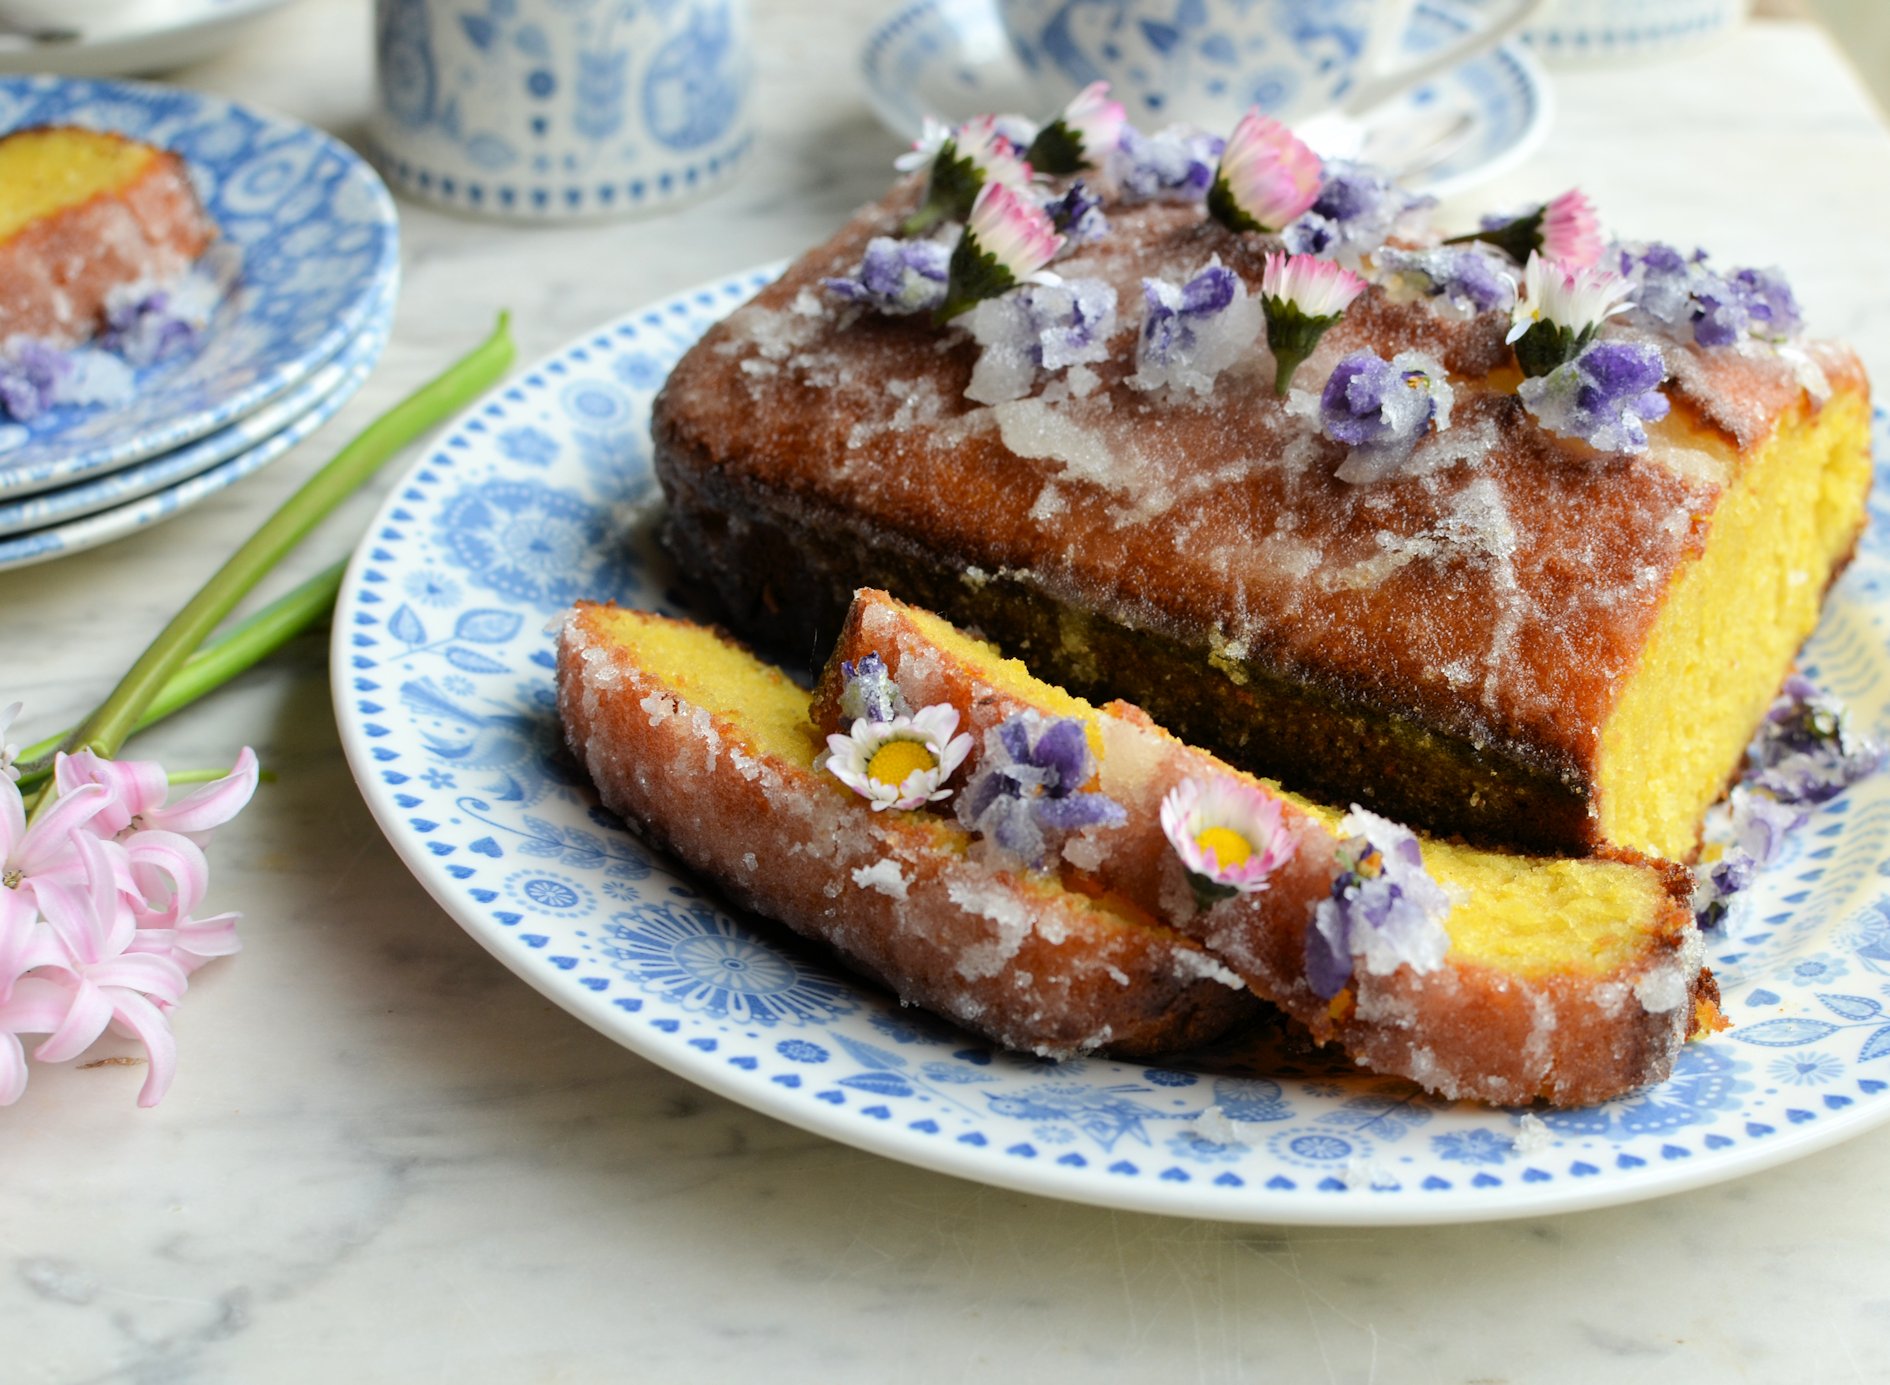 Lemon Drizzle Cake With Edible Flowers